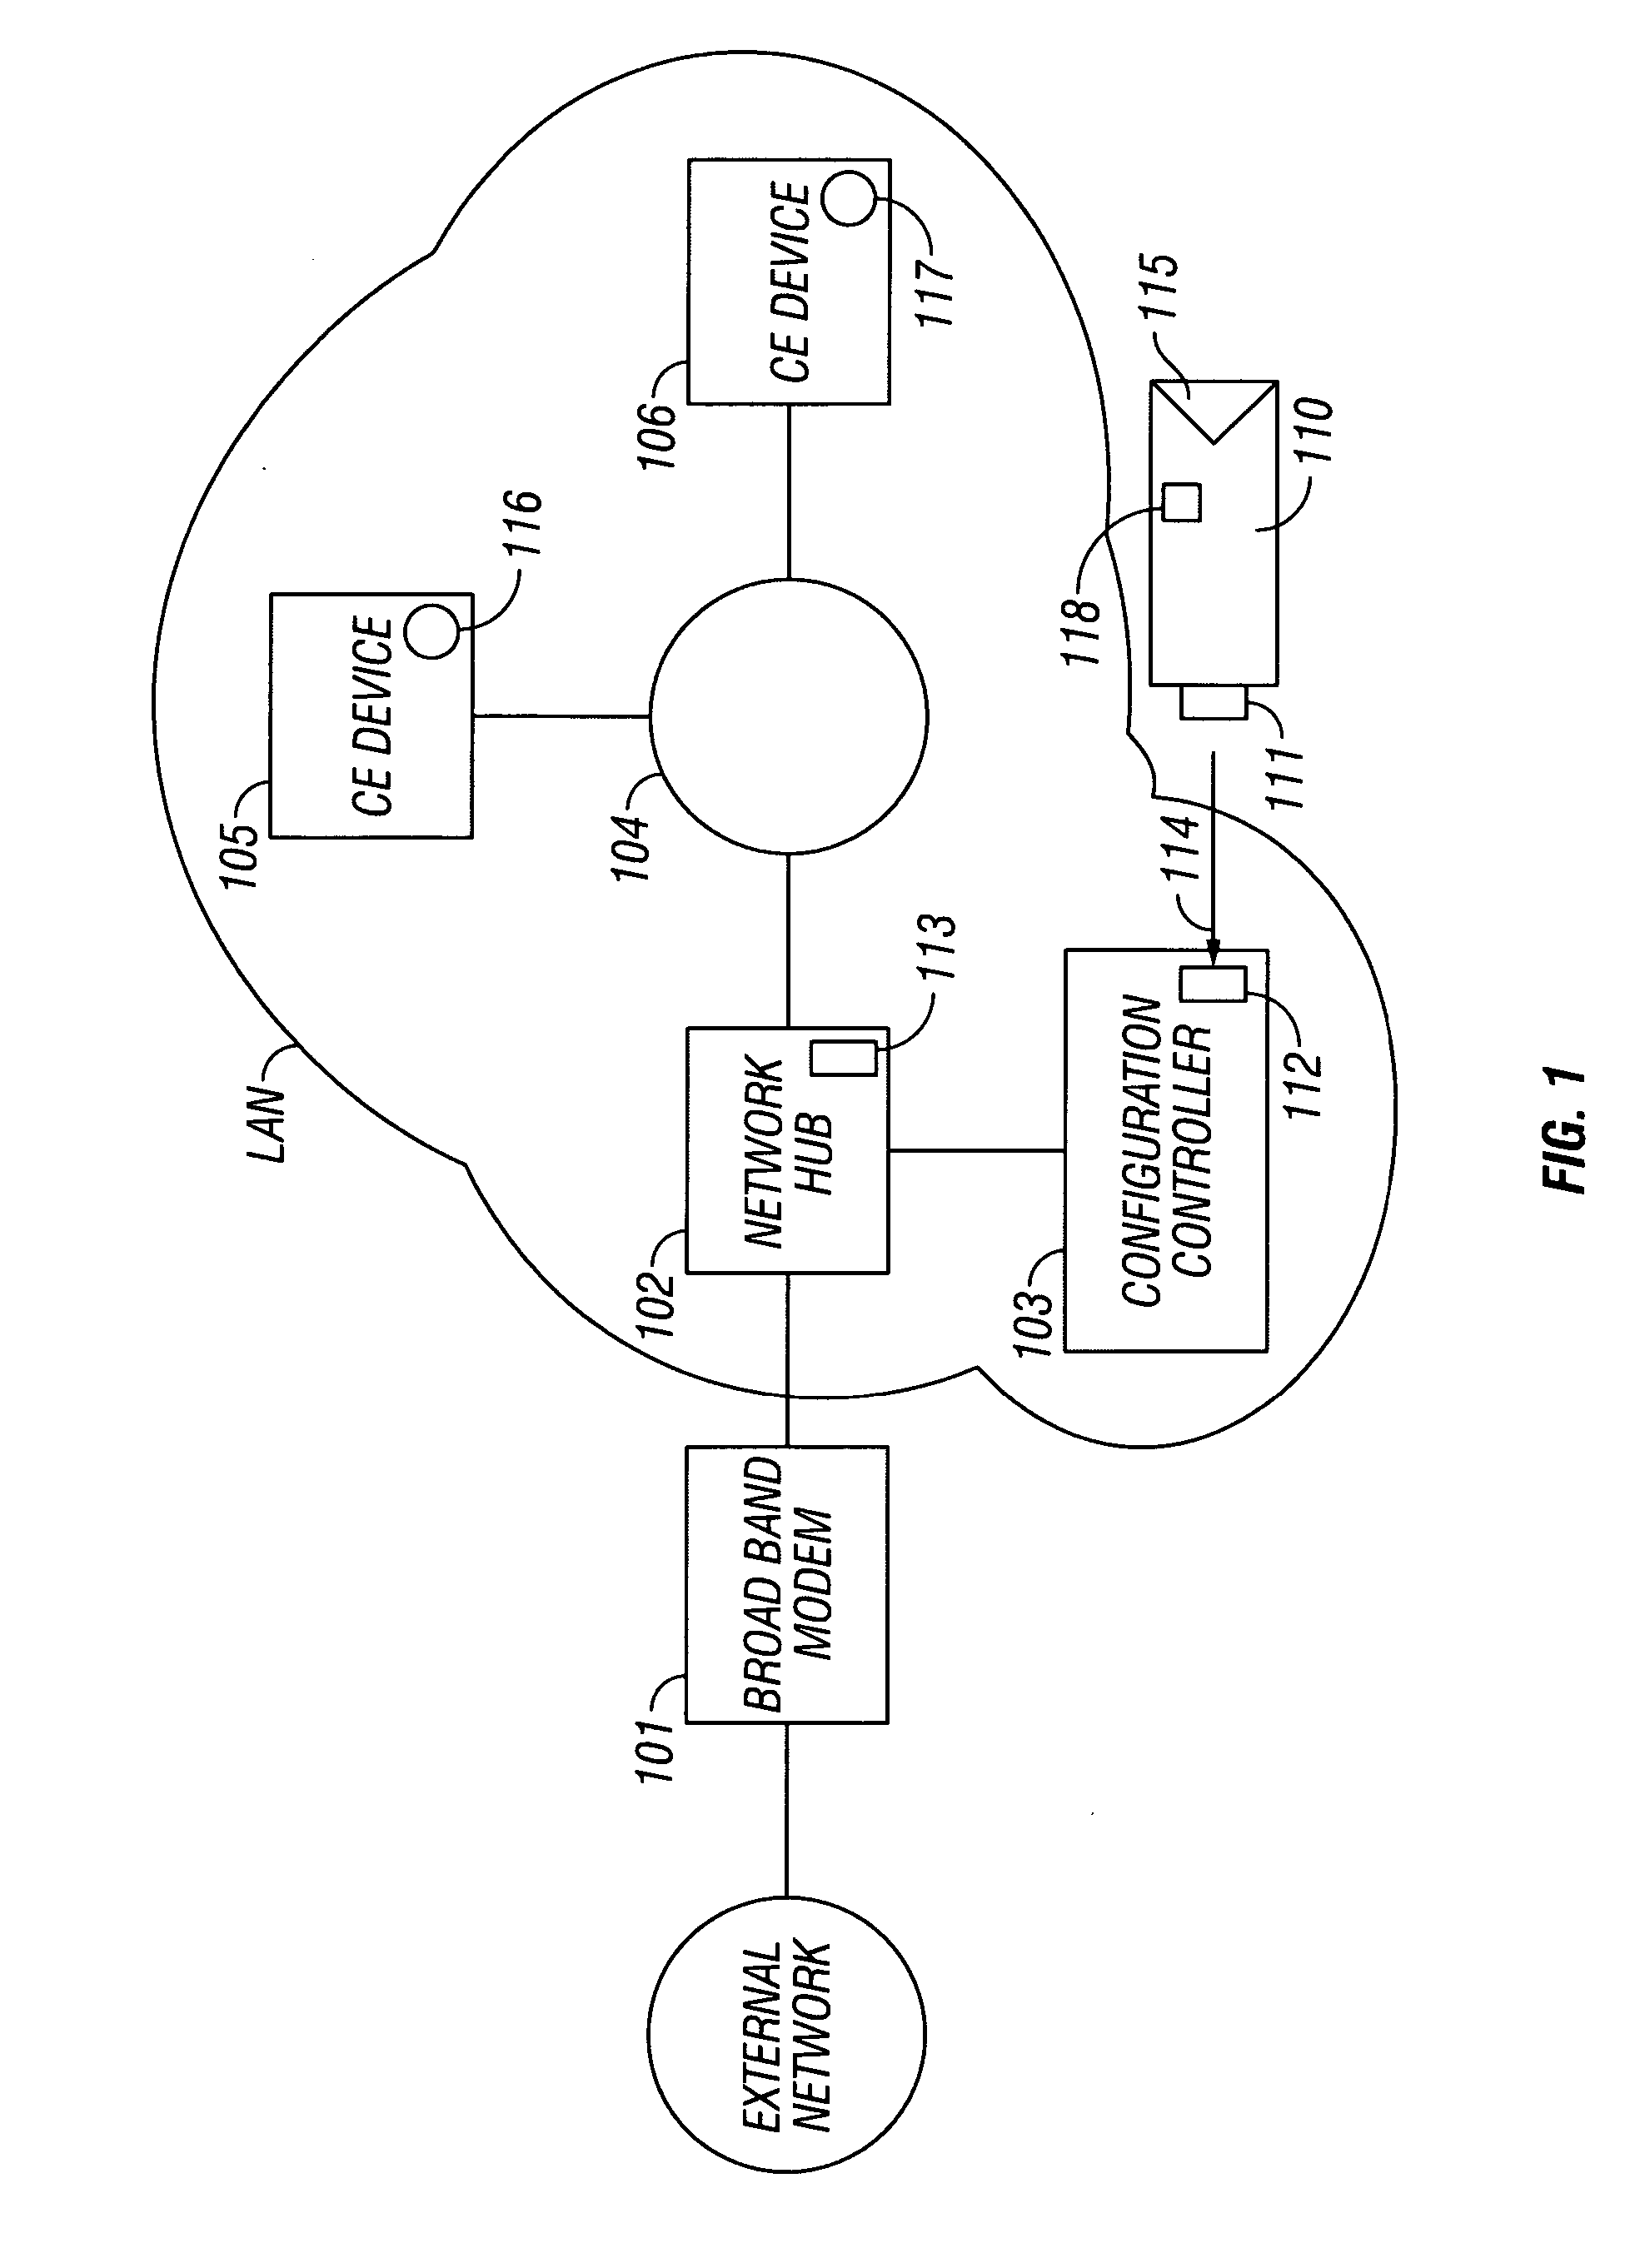 System and method for device configuration using a portable flash memory storage device with an infrared transmitter